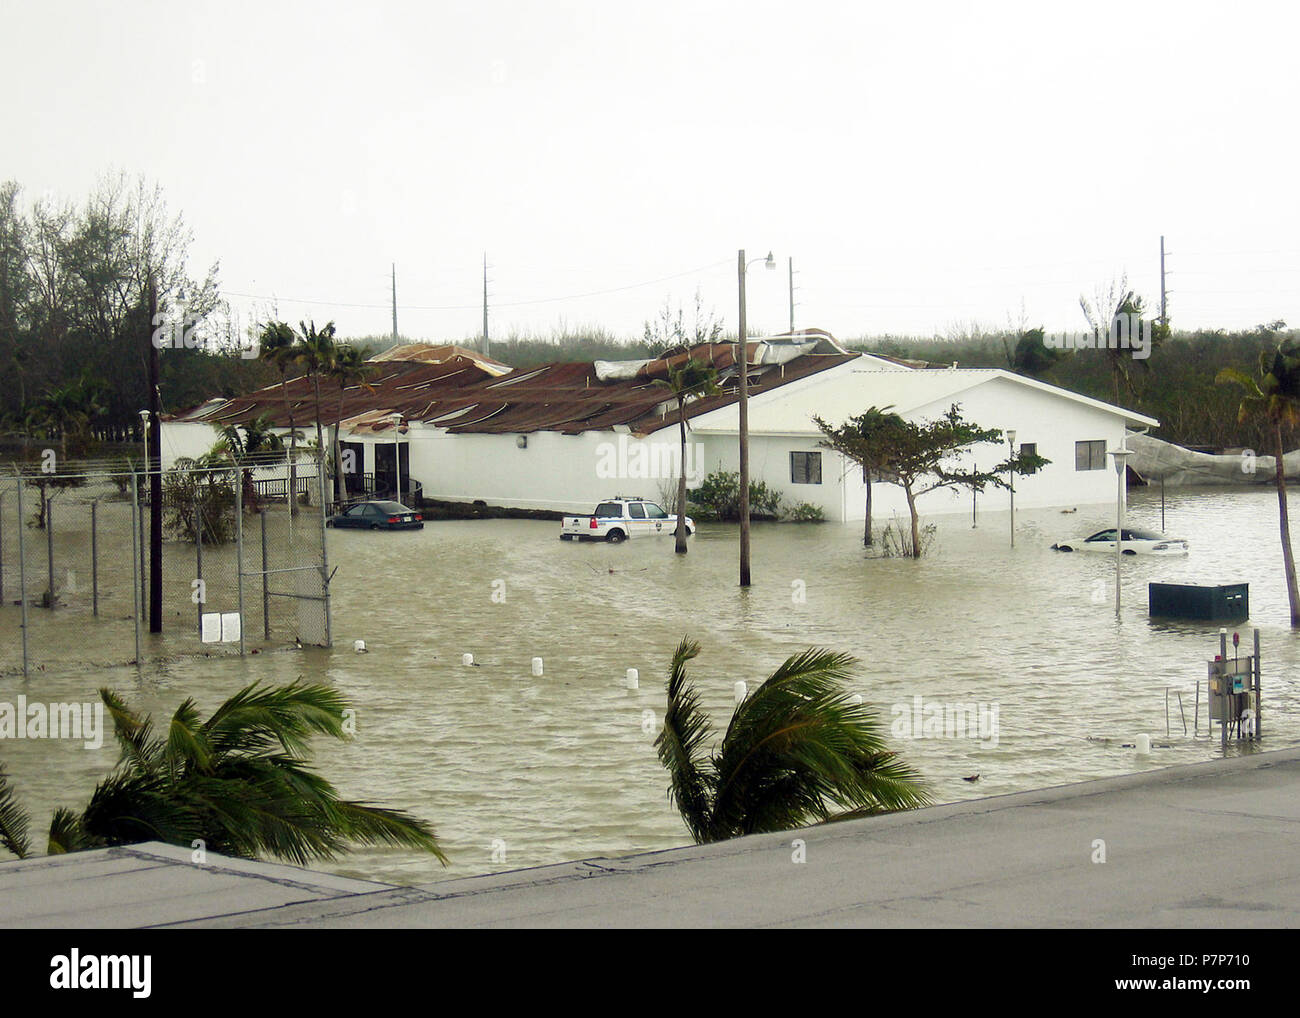 Hurricane Relief-25. The US Navy (USN) Naval Air Station (NAS) Key West, Florida (FL) flooded after being hit by Category 3 Hurricane Wilma. Stock Photo